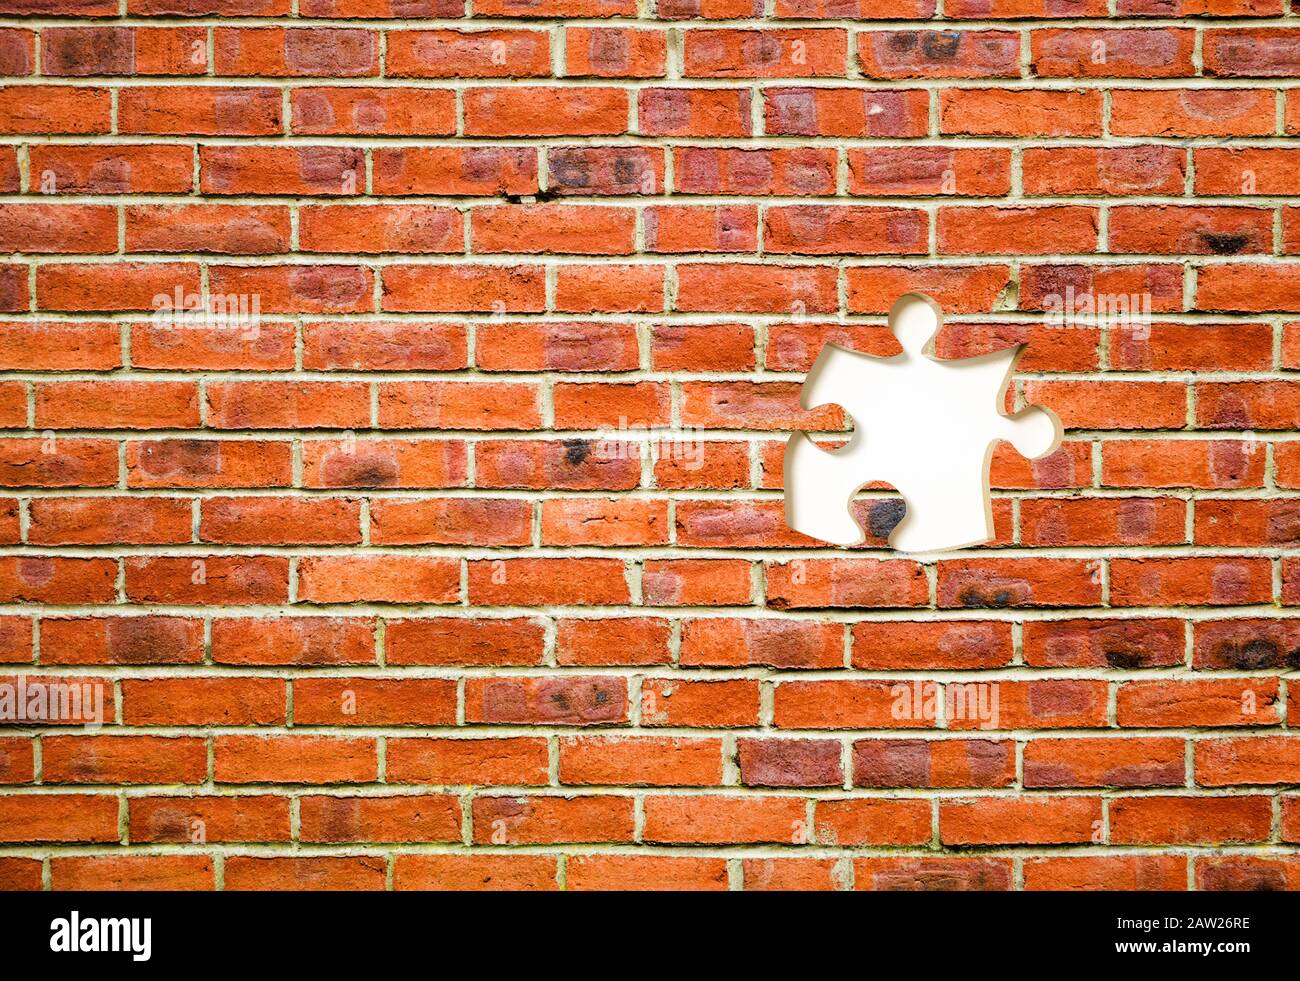 Red brick wall jigsaw puzzle with one piece missing Stock Photo